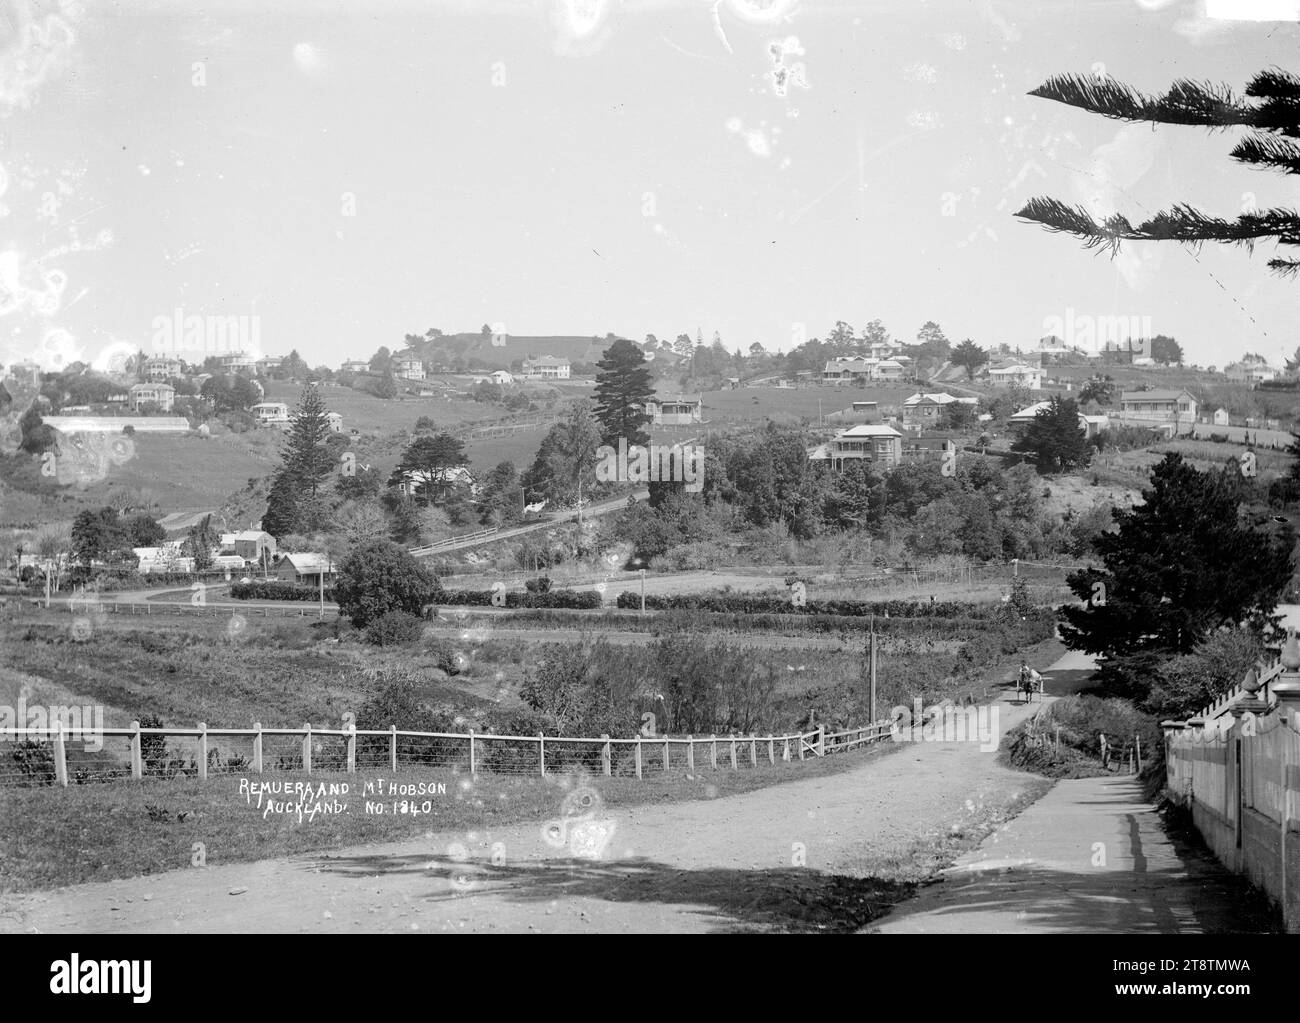 View of Remuera taken from vicinity of Brighton Road, Parnell looking towards Mount Hobson, View of Remuera with Mount Hobson on the horizon possibly taken from the vicinity of Brighton Road. Shore Road is in the middle distance with Seaview Road running off it up the hill. A horse and cart can be seen on the right coming up Brighton Road towards the photographer. Taken in early 1900s Stock Photo